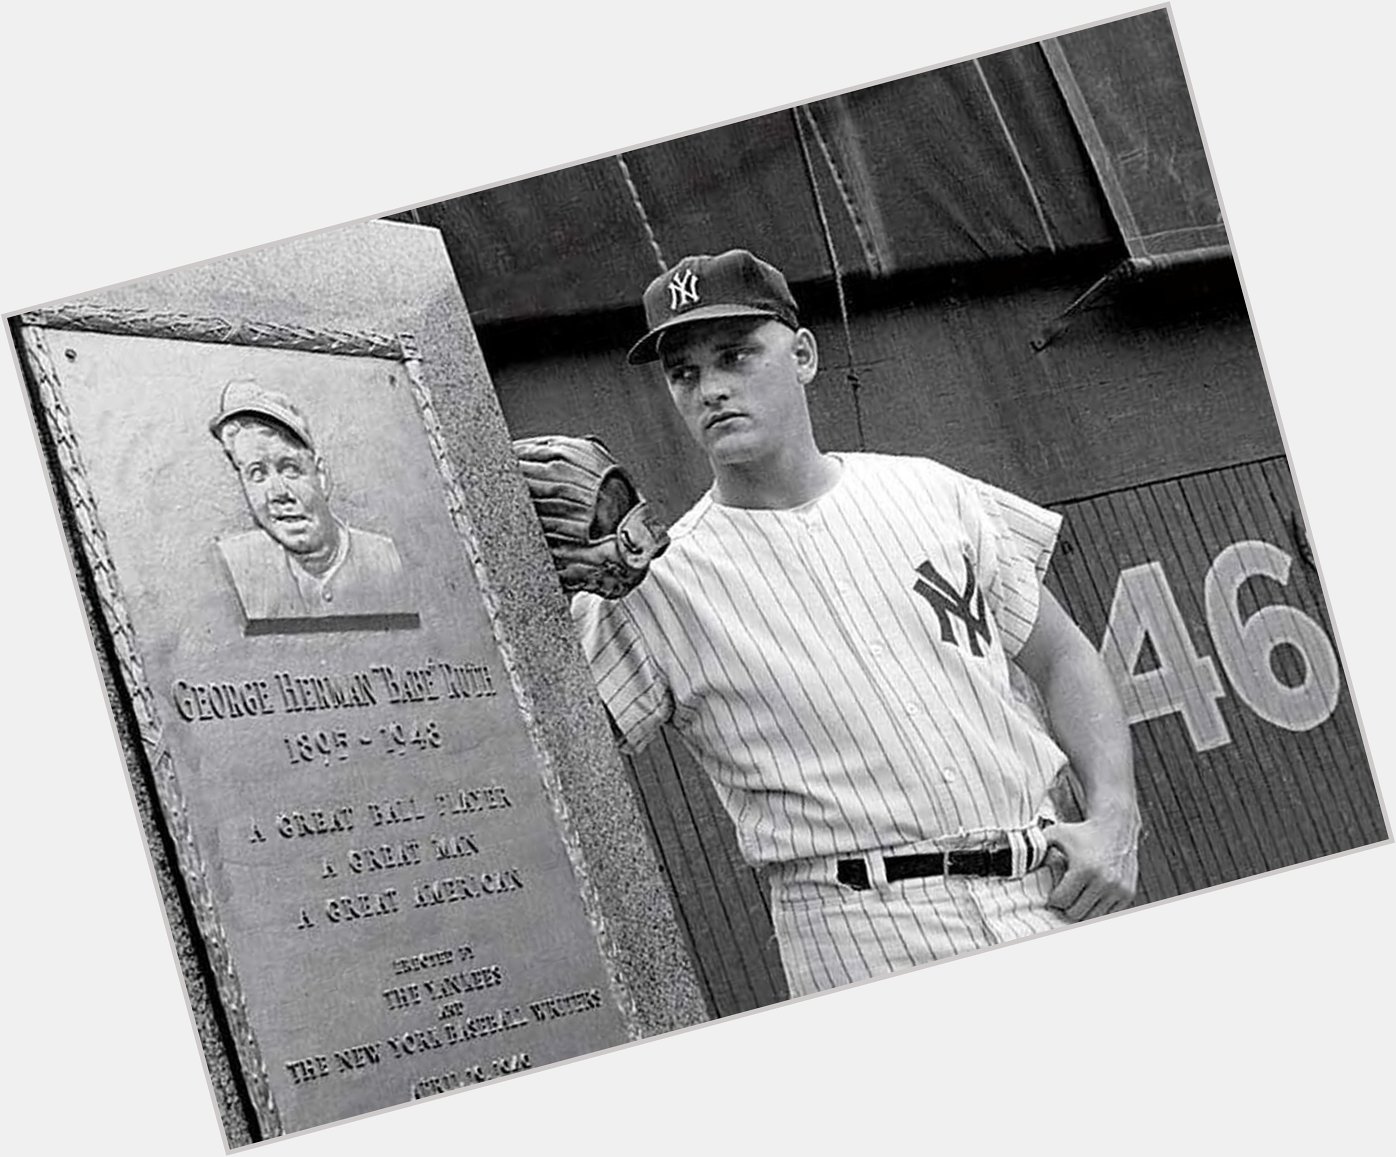 A happy birthday to Yankee great Roger Maris - RIP & God bless!   